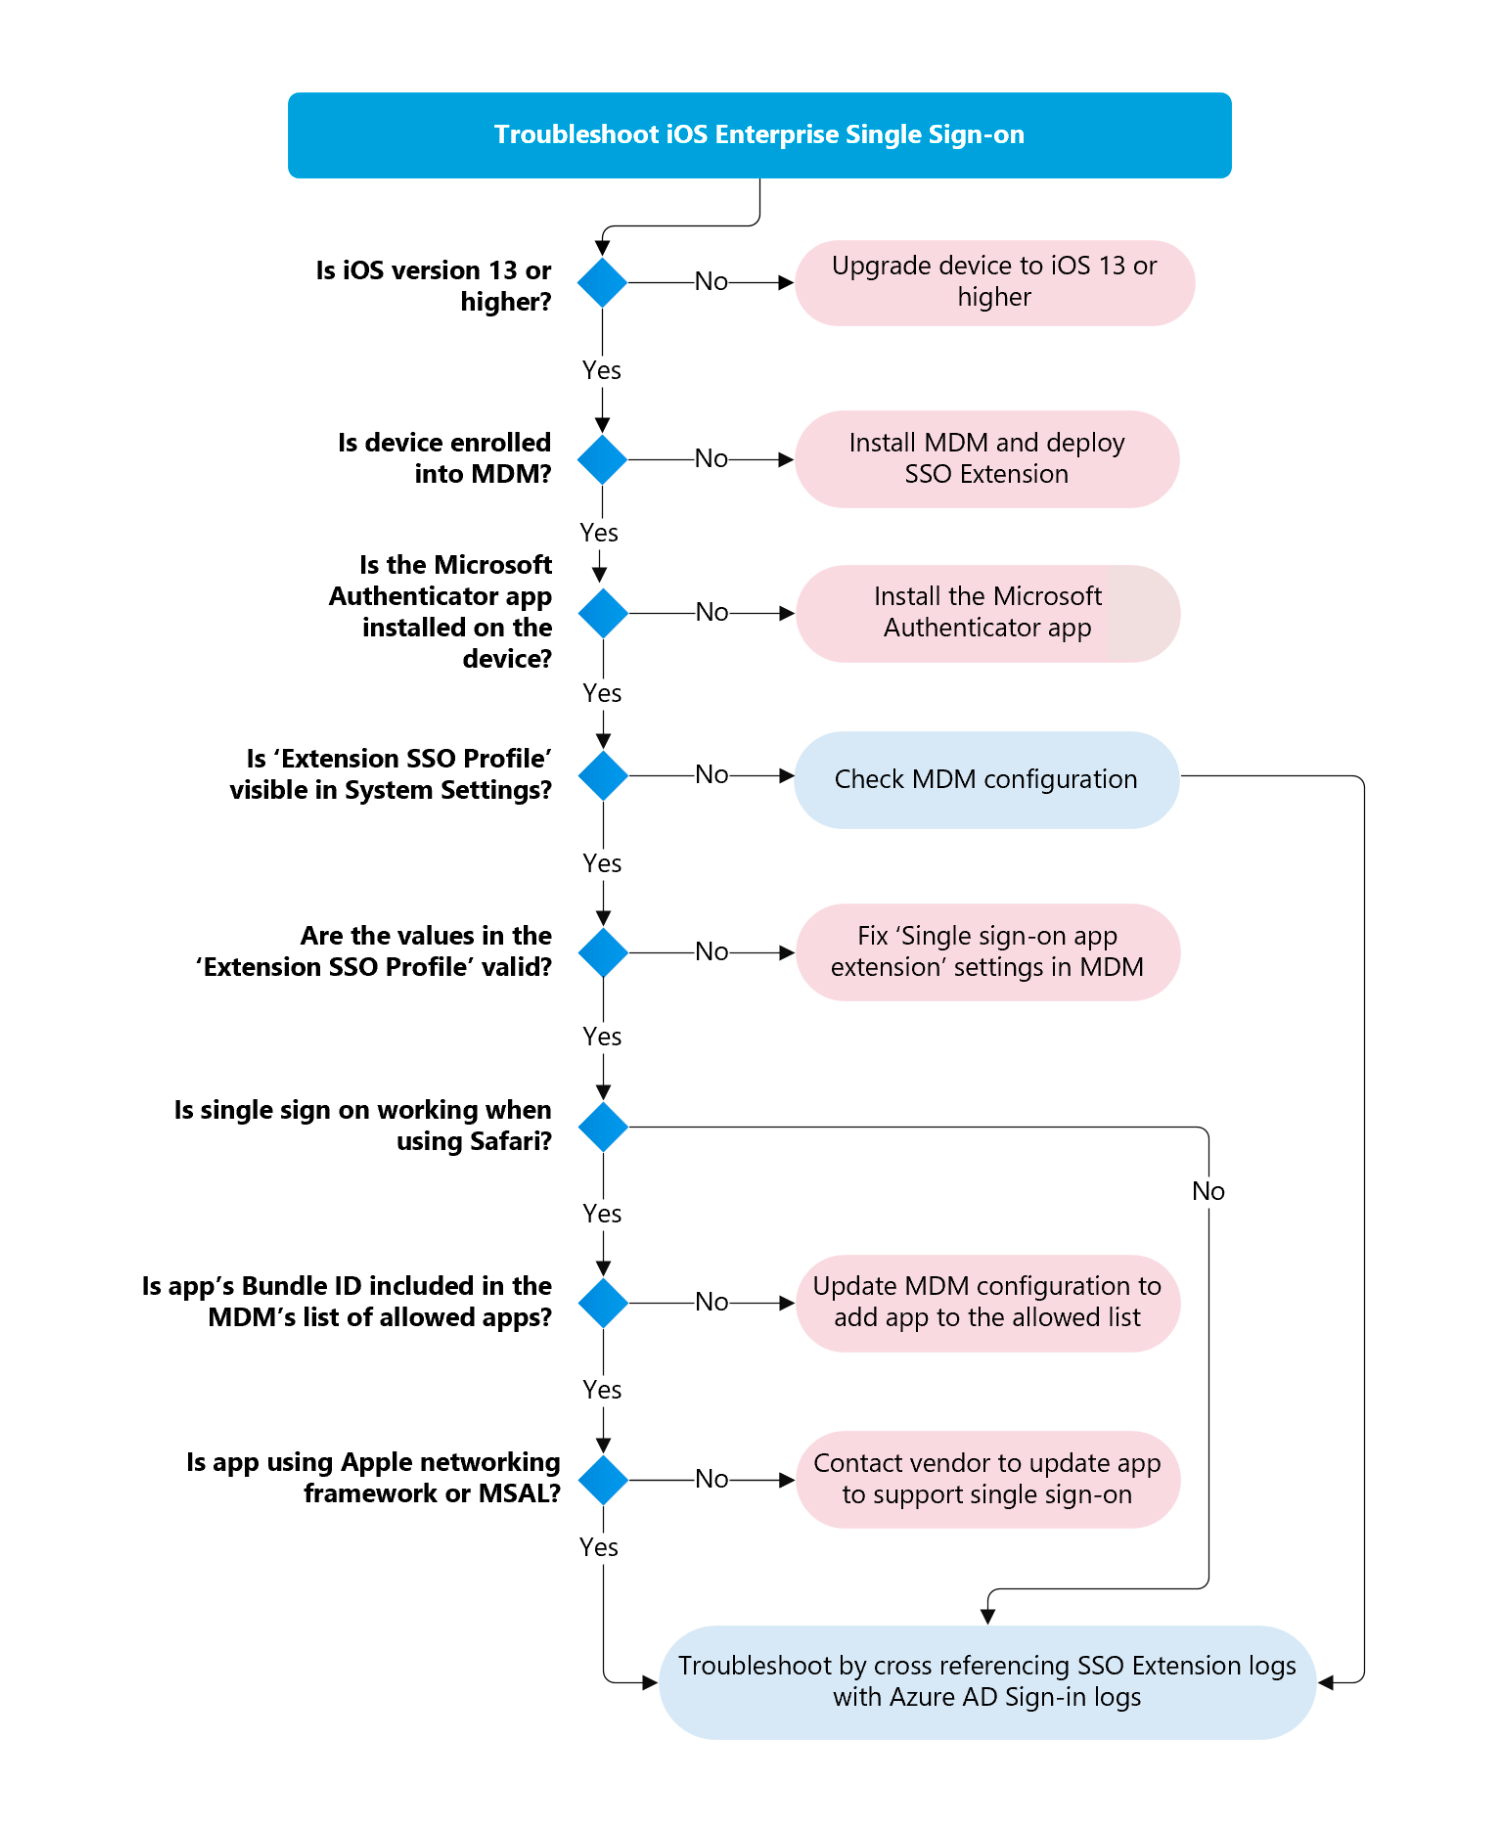 Screenshot of flowchart showing the troubleshooting process flow for Apple SSO extension on iOS devices.